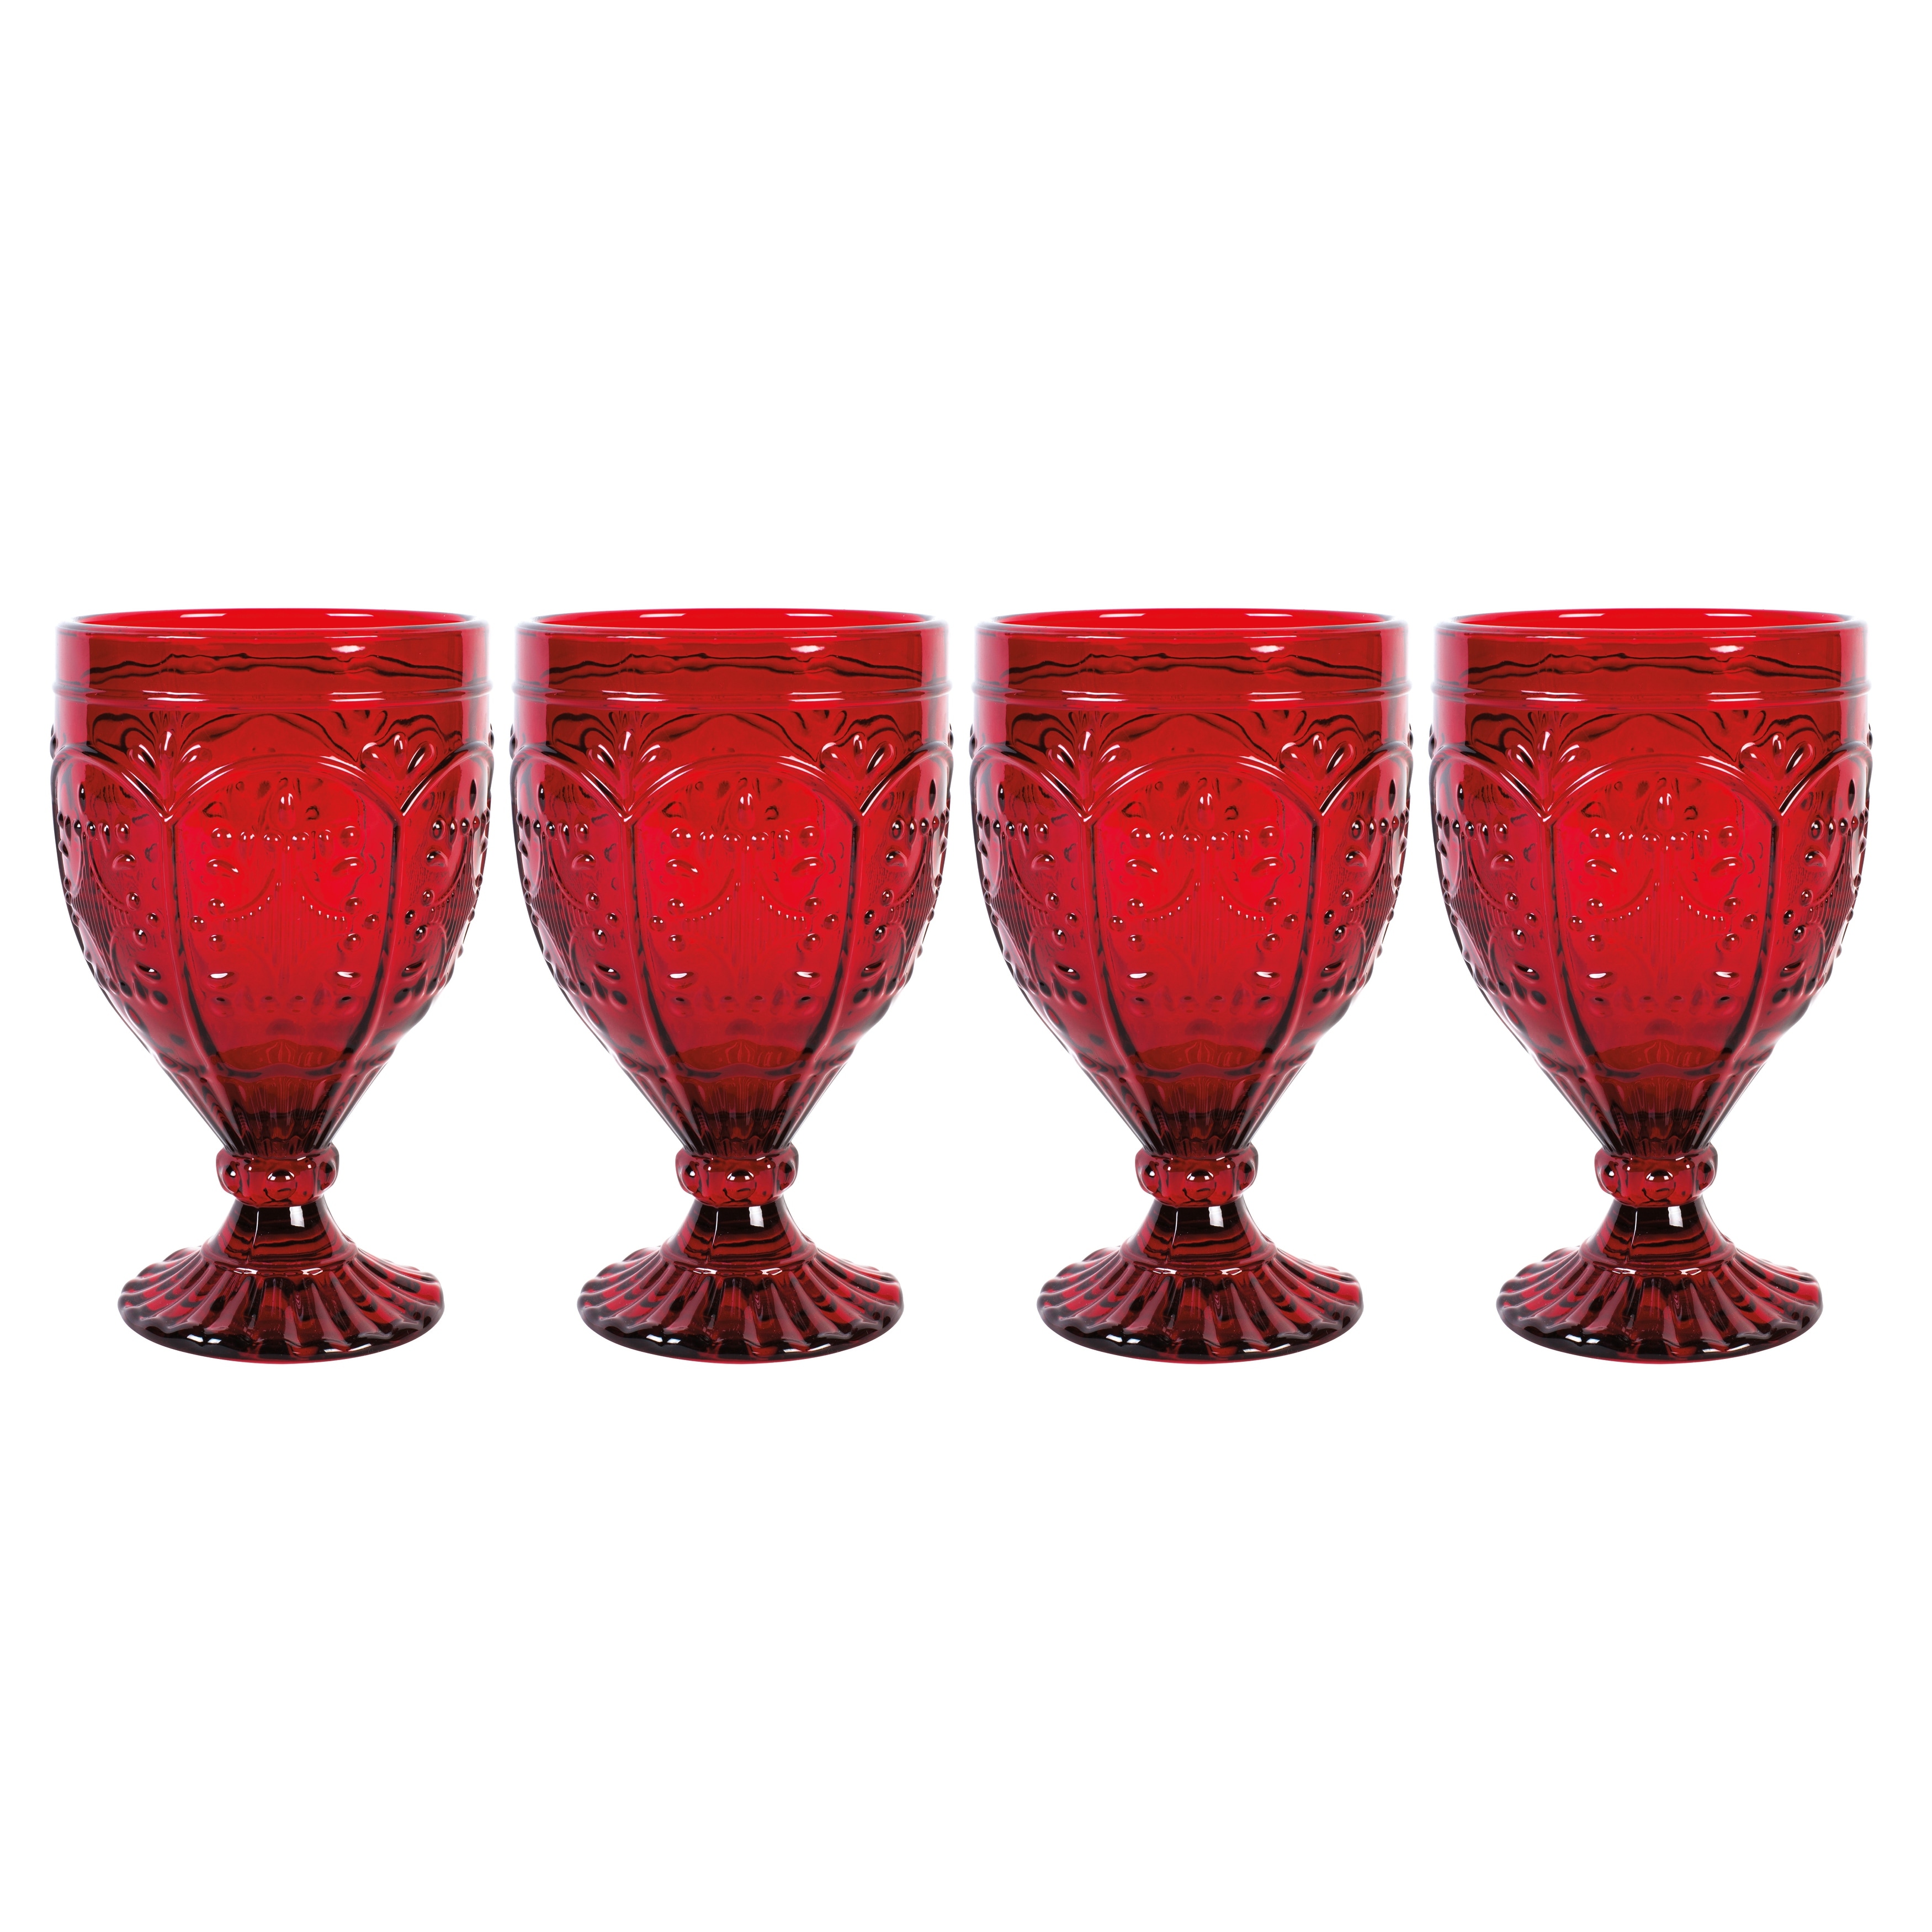 https://ak1.ostkcdn.com/images/products/is/images/direct/ddb7a0311206de1b9511b43dc22a64ce72f802ba/Fitz-and-Floyd-Trestle-Red-Goblet-%28Set-of-4%29.jpg